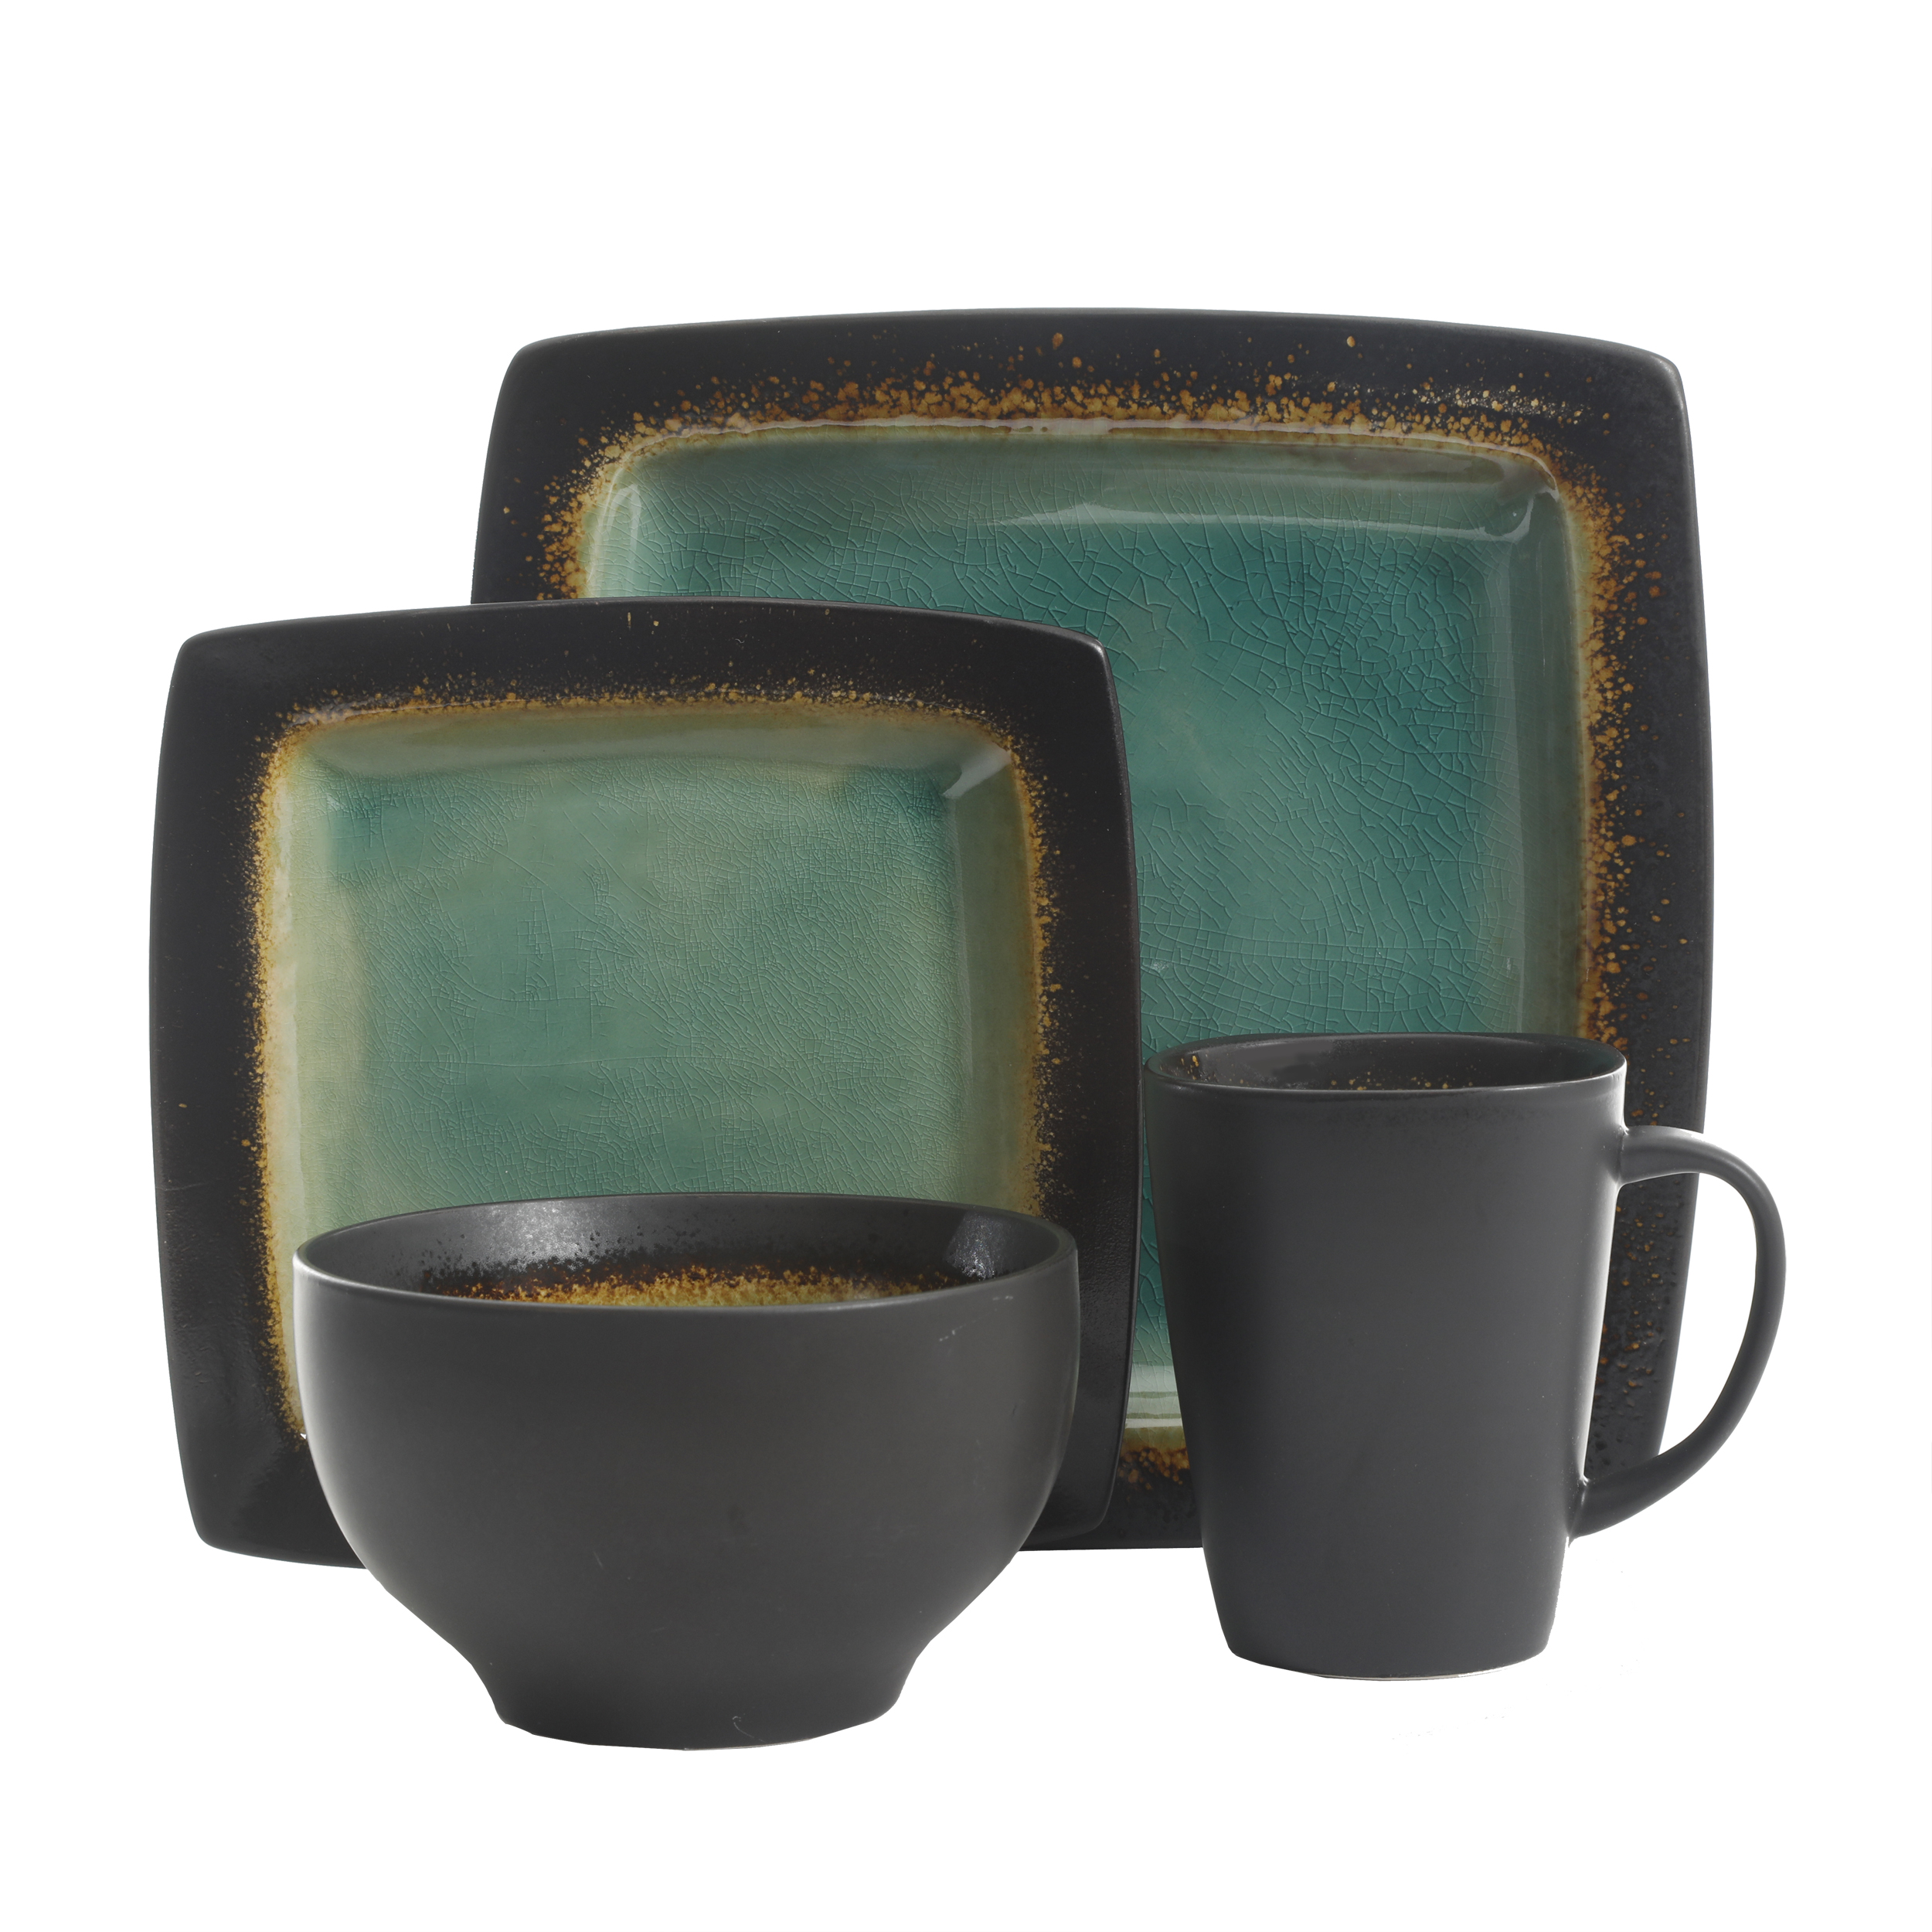 Gibson Home Ocean Oasis 16-Piece Dinnerware Set, Turquoise - image 3 of 10